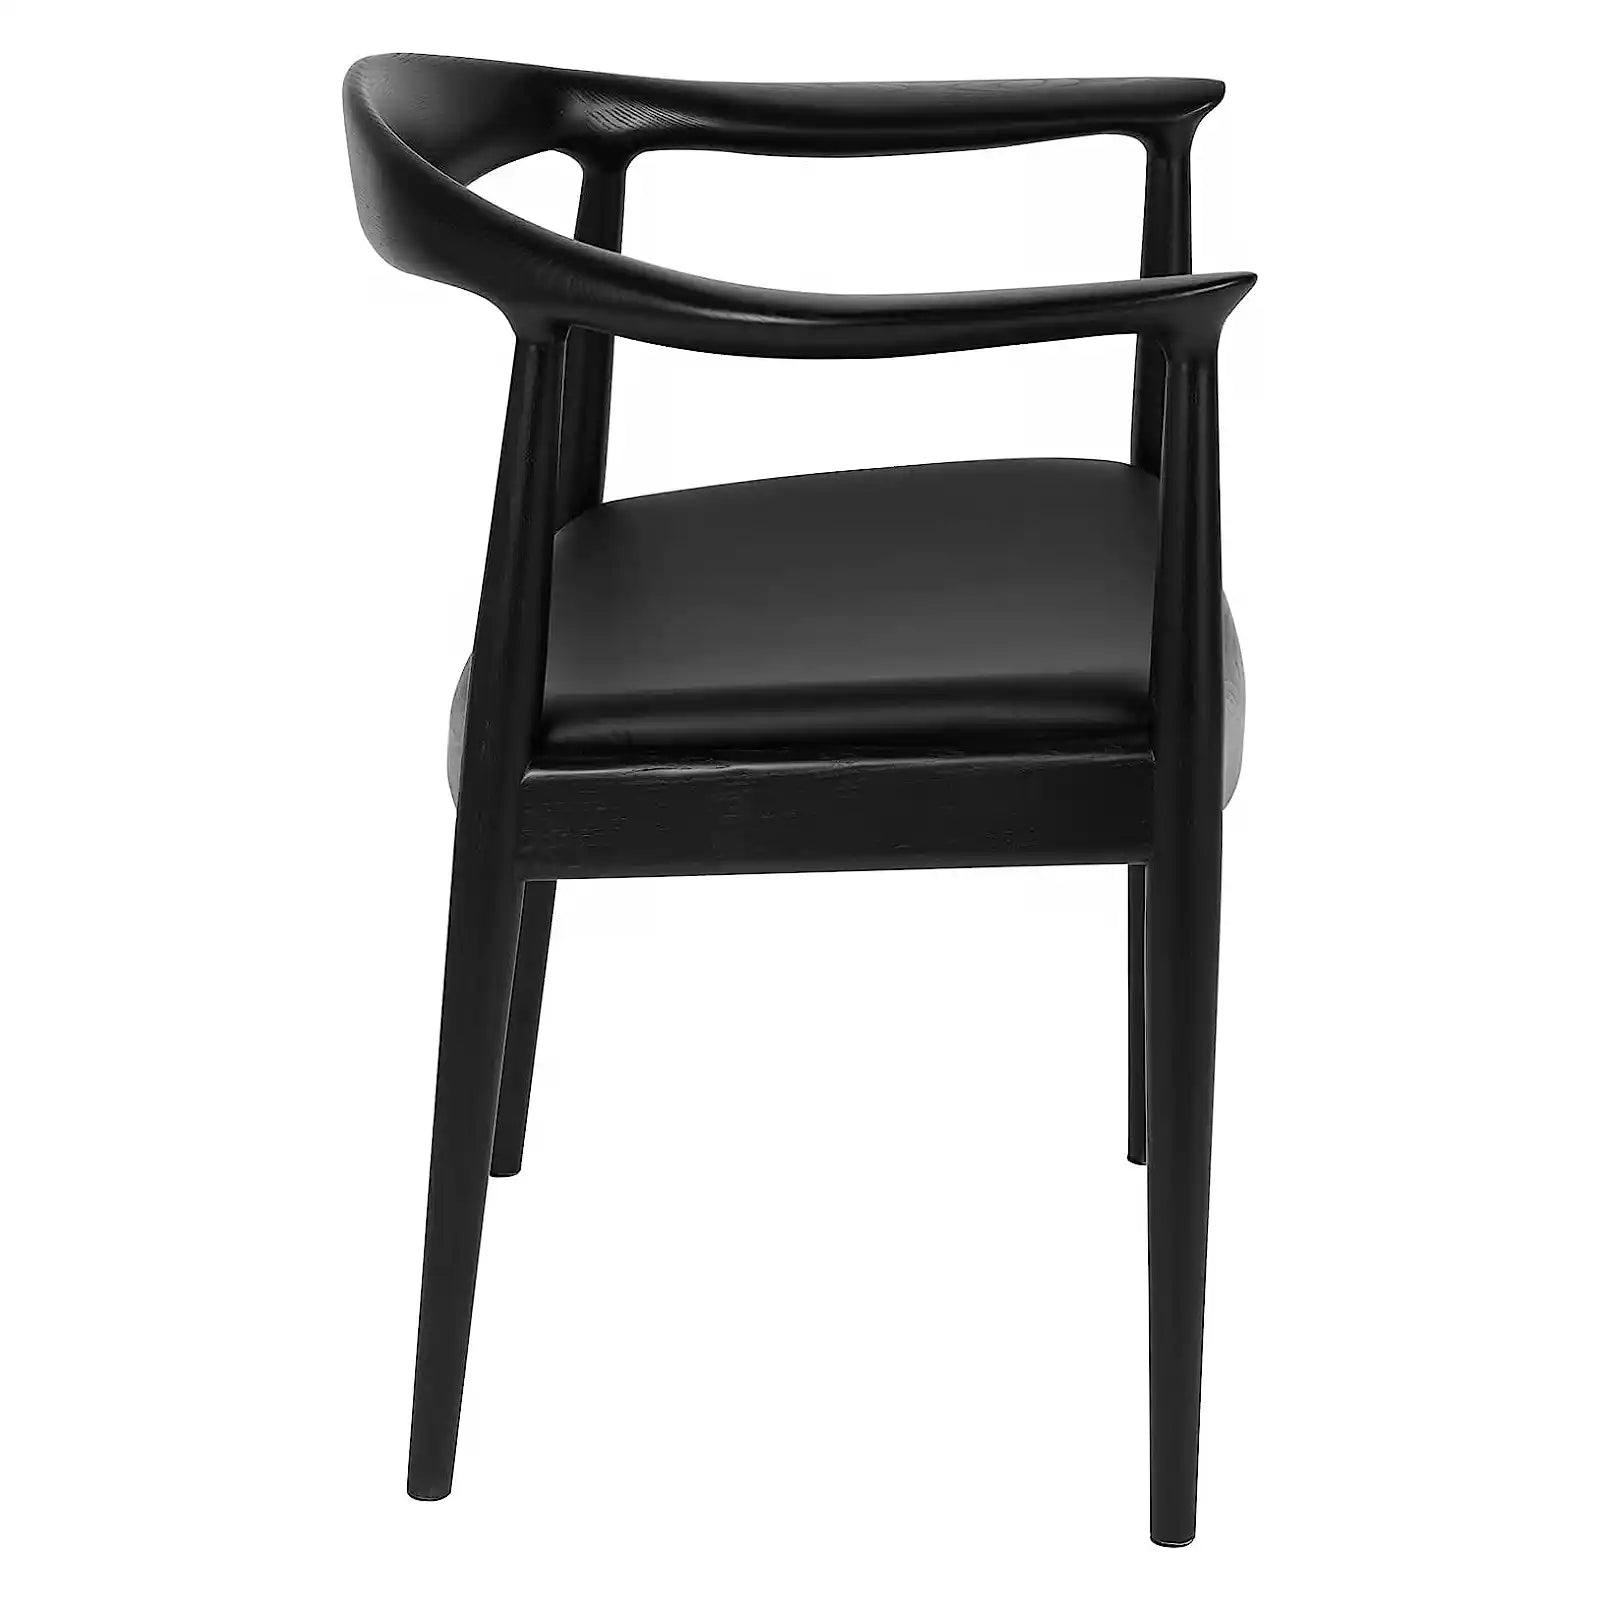 Armchair Upholstered Dining Chair, Presidential Mid-Century Modern Accent Chair